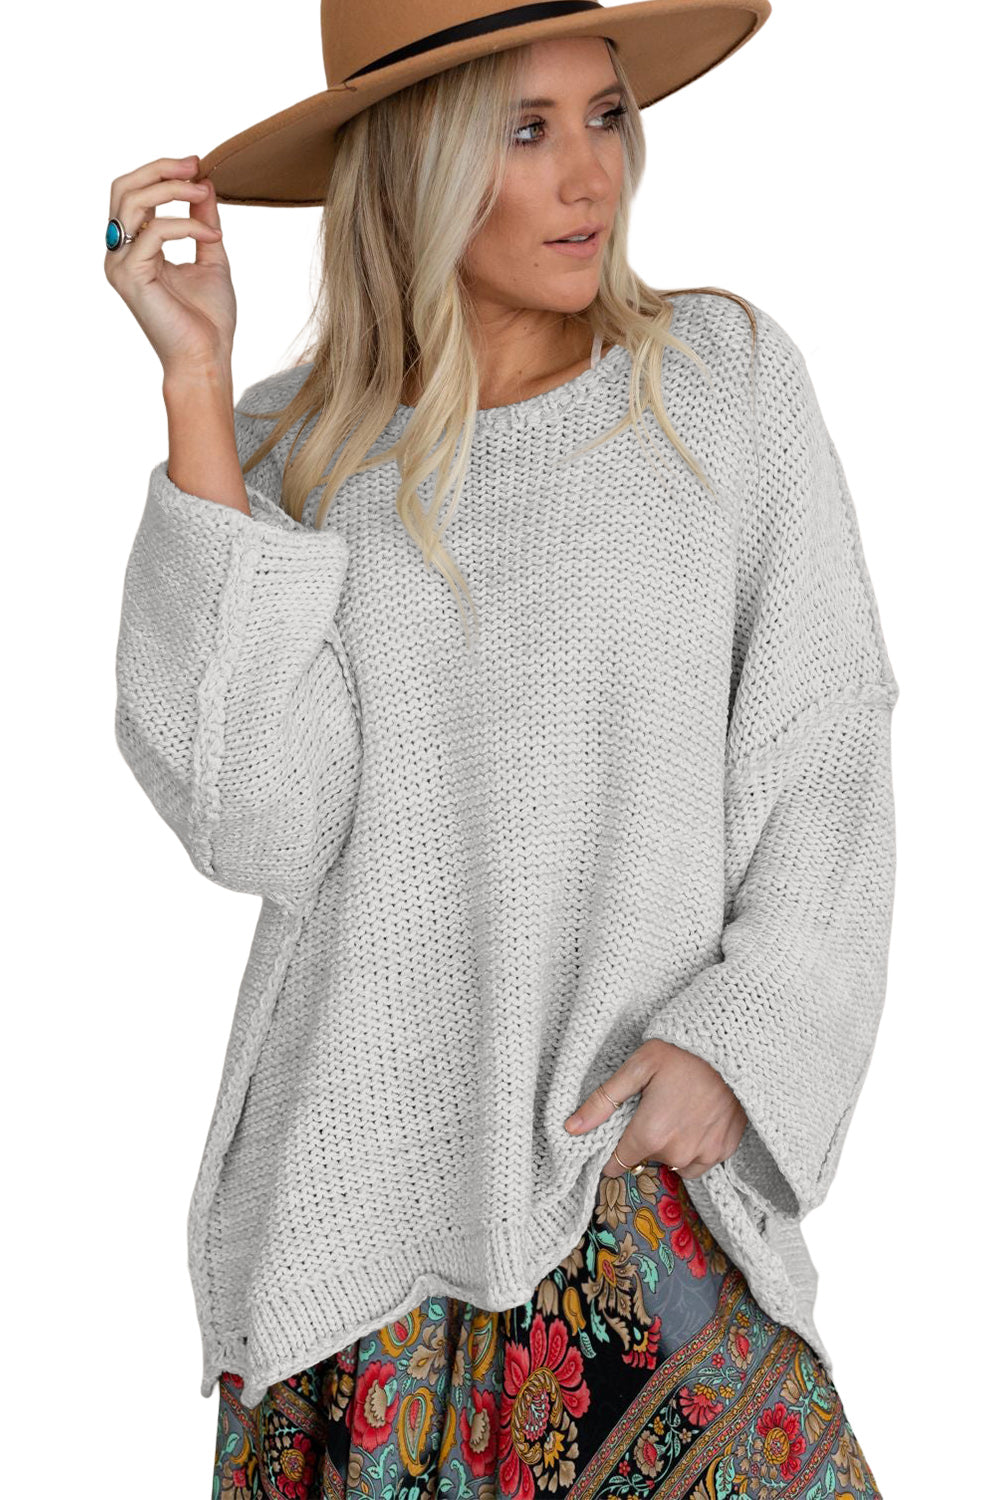 Slouchy Textured Knit Loose Sweater